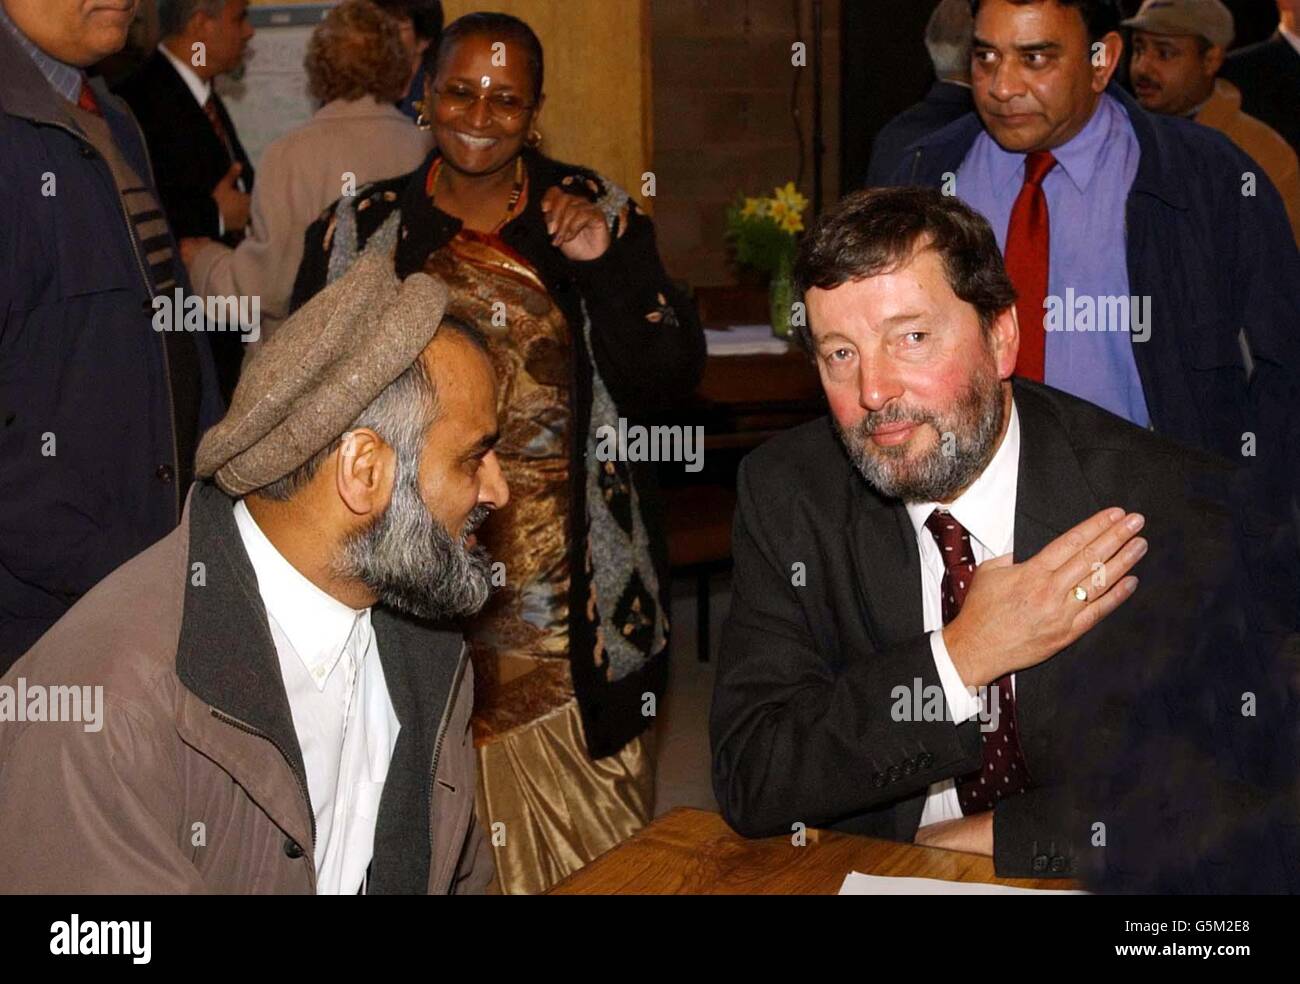 Home Secretary David Blunkett talks with Zualfqar Hussain of Small Heath during his visit to a multi-faith community centre in Balsall Heath in Birmingham. * ..... Immigrants should have to swear an oath of allegiance to show their clear primary loyalty to Britain, a report into race riots. The controversial suggestion in the Cantle Report, which was commissioned by Blunkett, goes even further than his recent comments that new arrivals should learn English and adopt British norms. Stock Photo